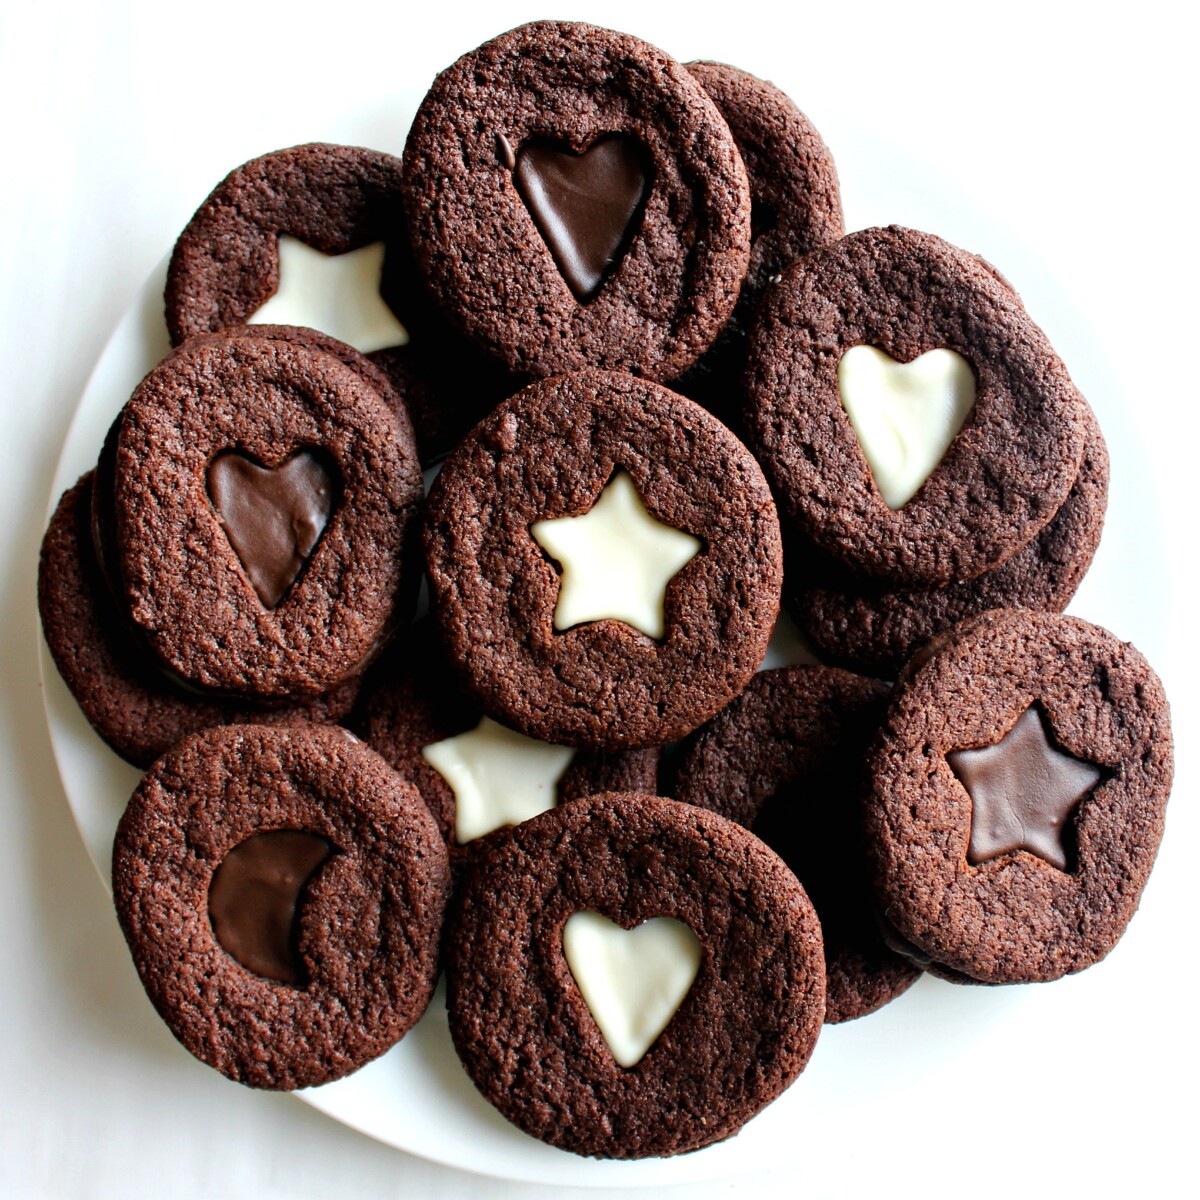 Sandwich Cookies with decorative heart, moon, and star cutouts on a white plate.